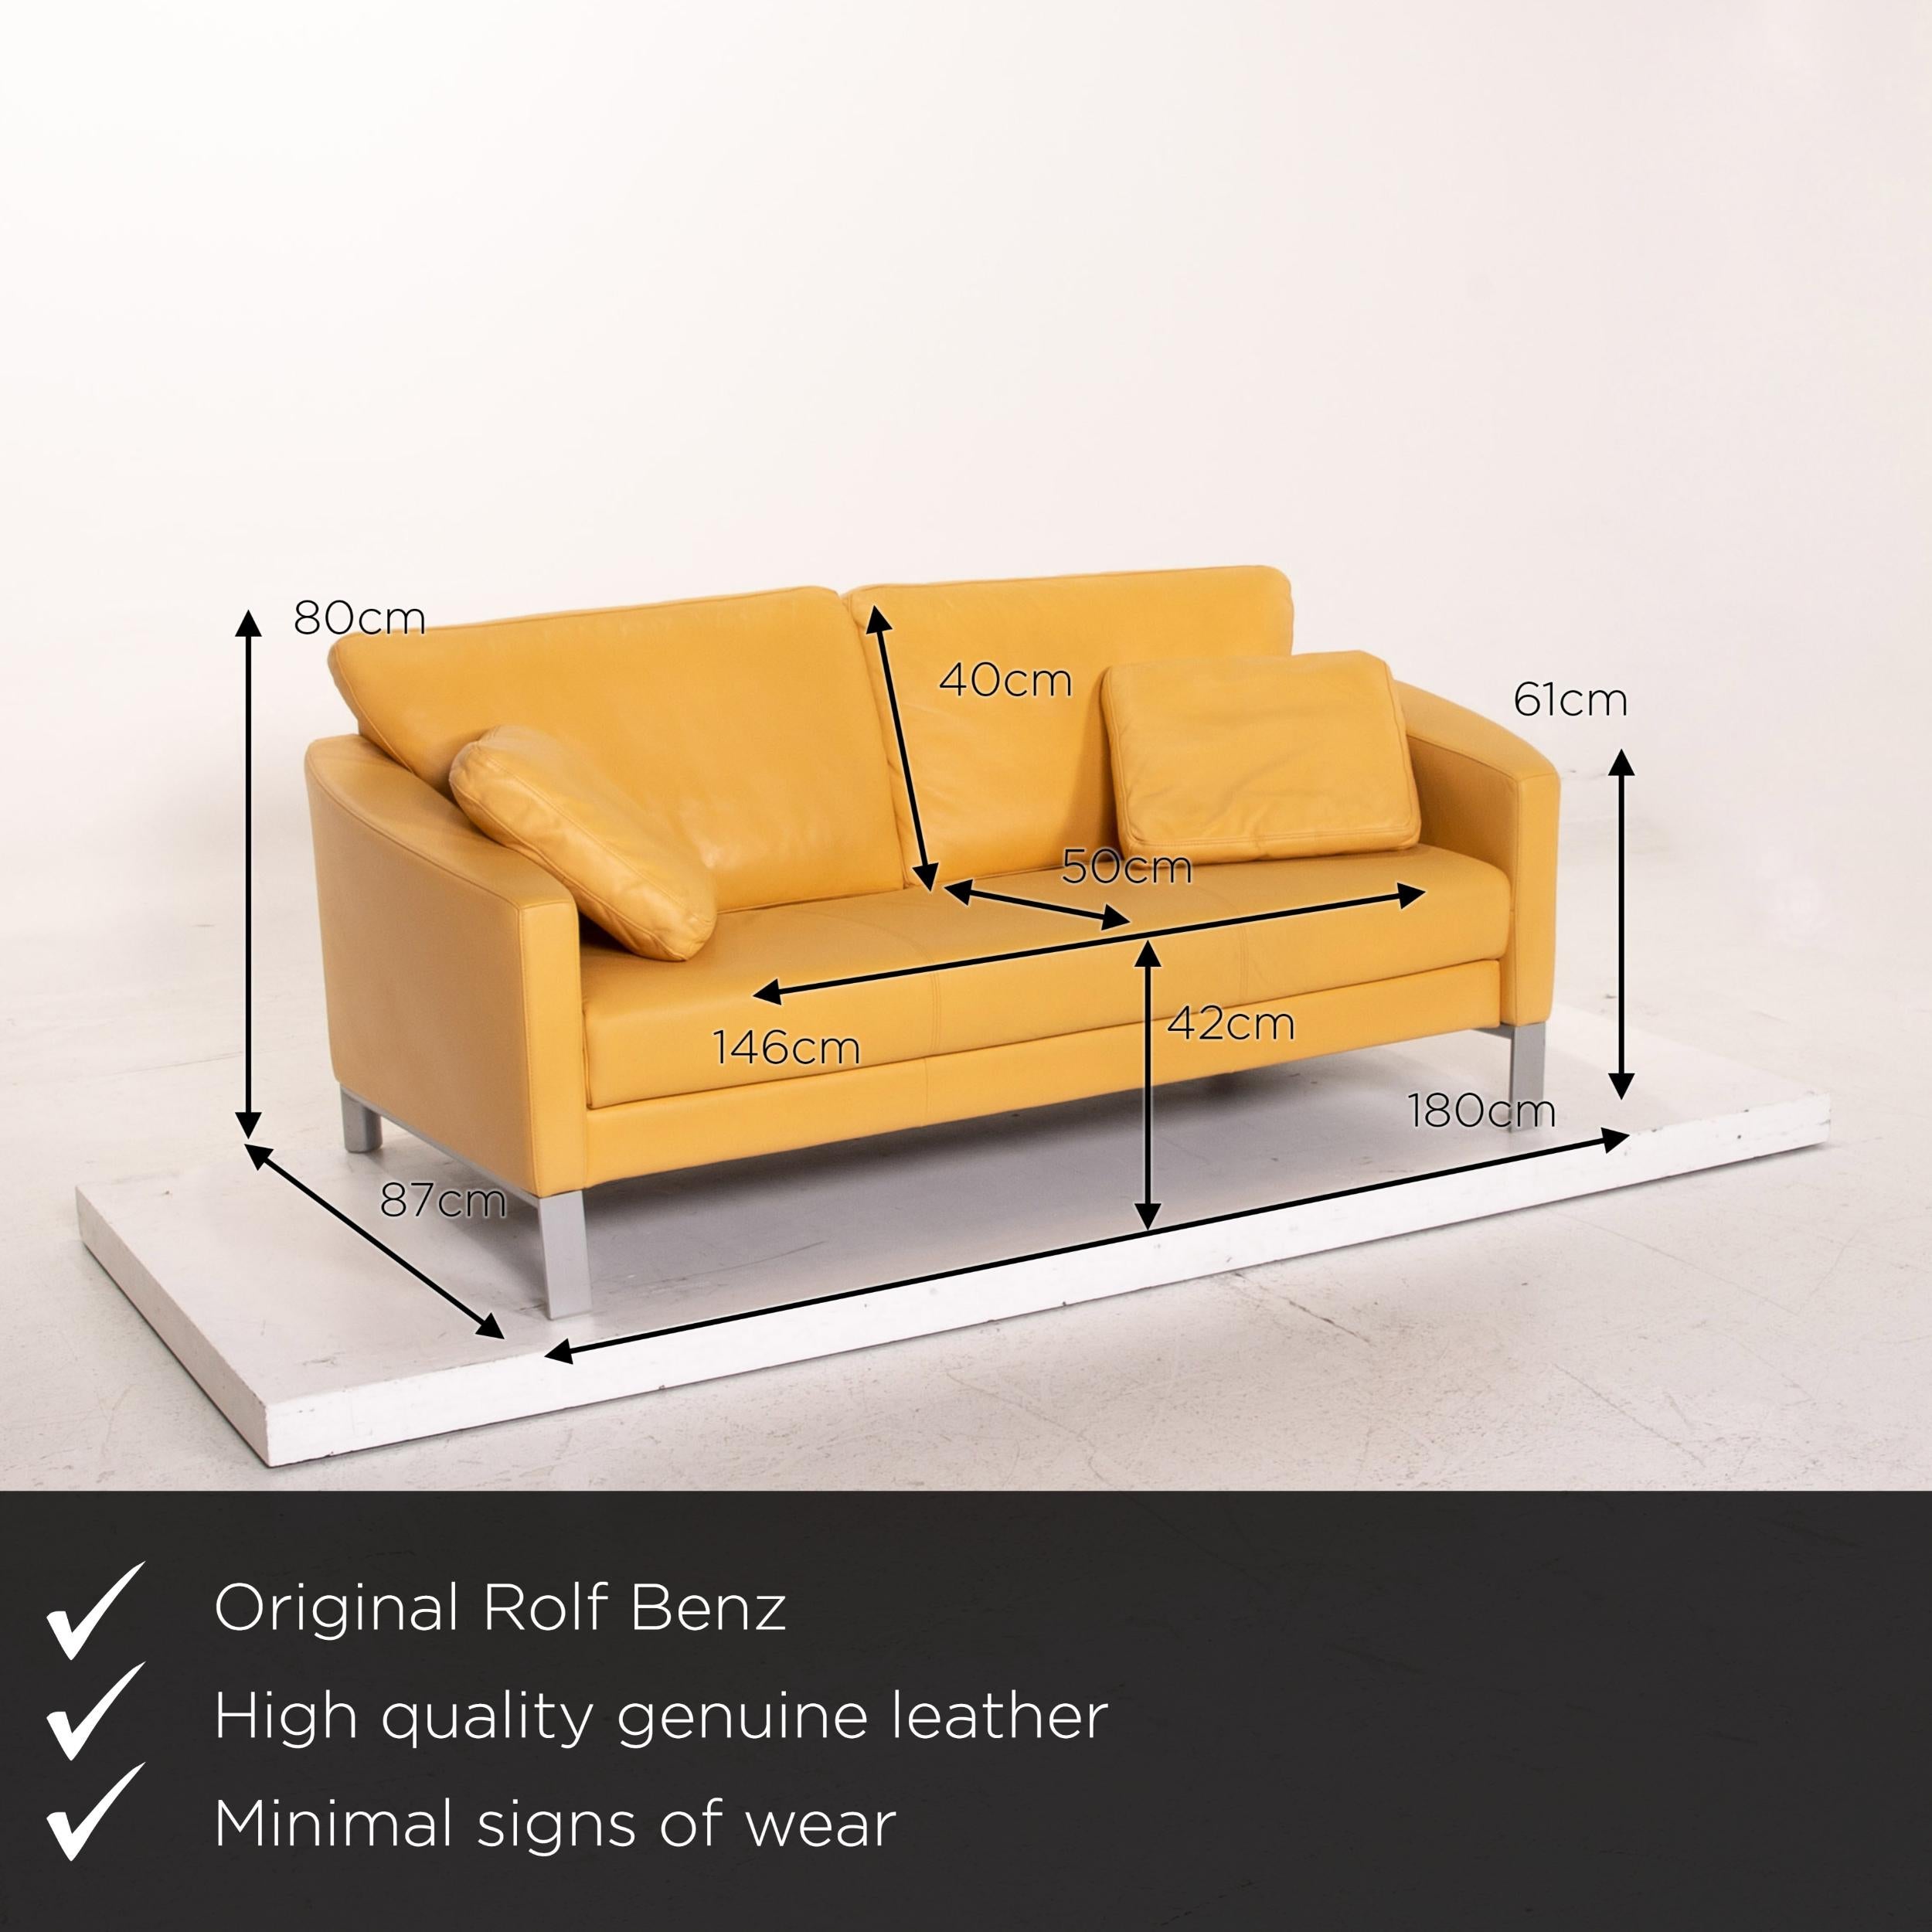 We present to you a Rolf Benz leather sofa yellow two-seat couch.
  
 

 Product measurements in centimeters:
 

Depth 87
Width 180
Height 80
Seat height 42
Rest height 61
Seat depth 50
Seat width 146
Back height 40.